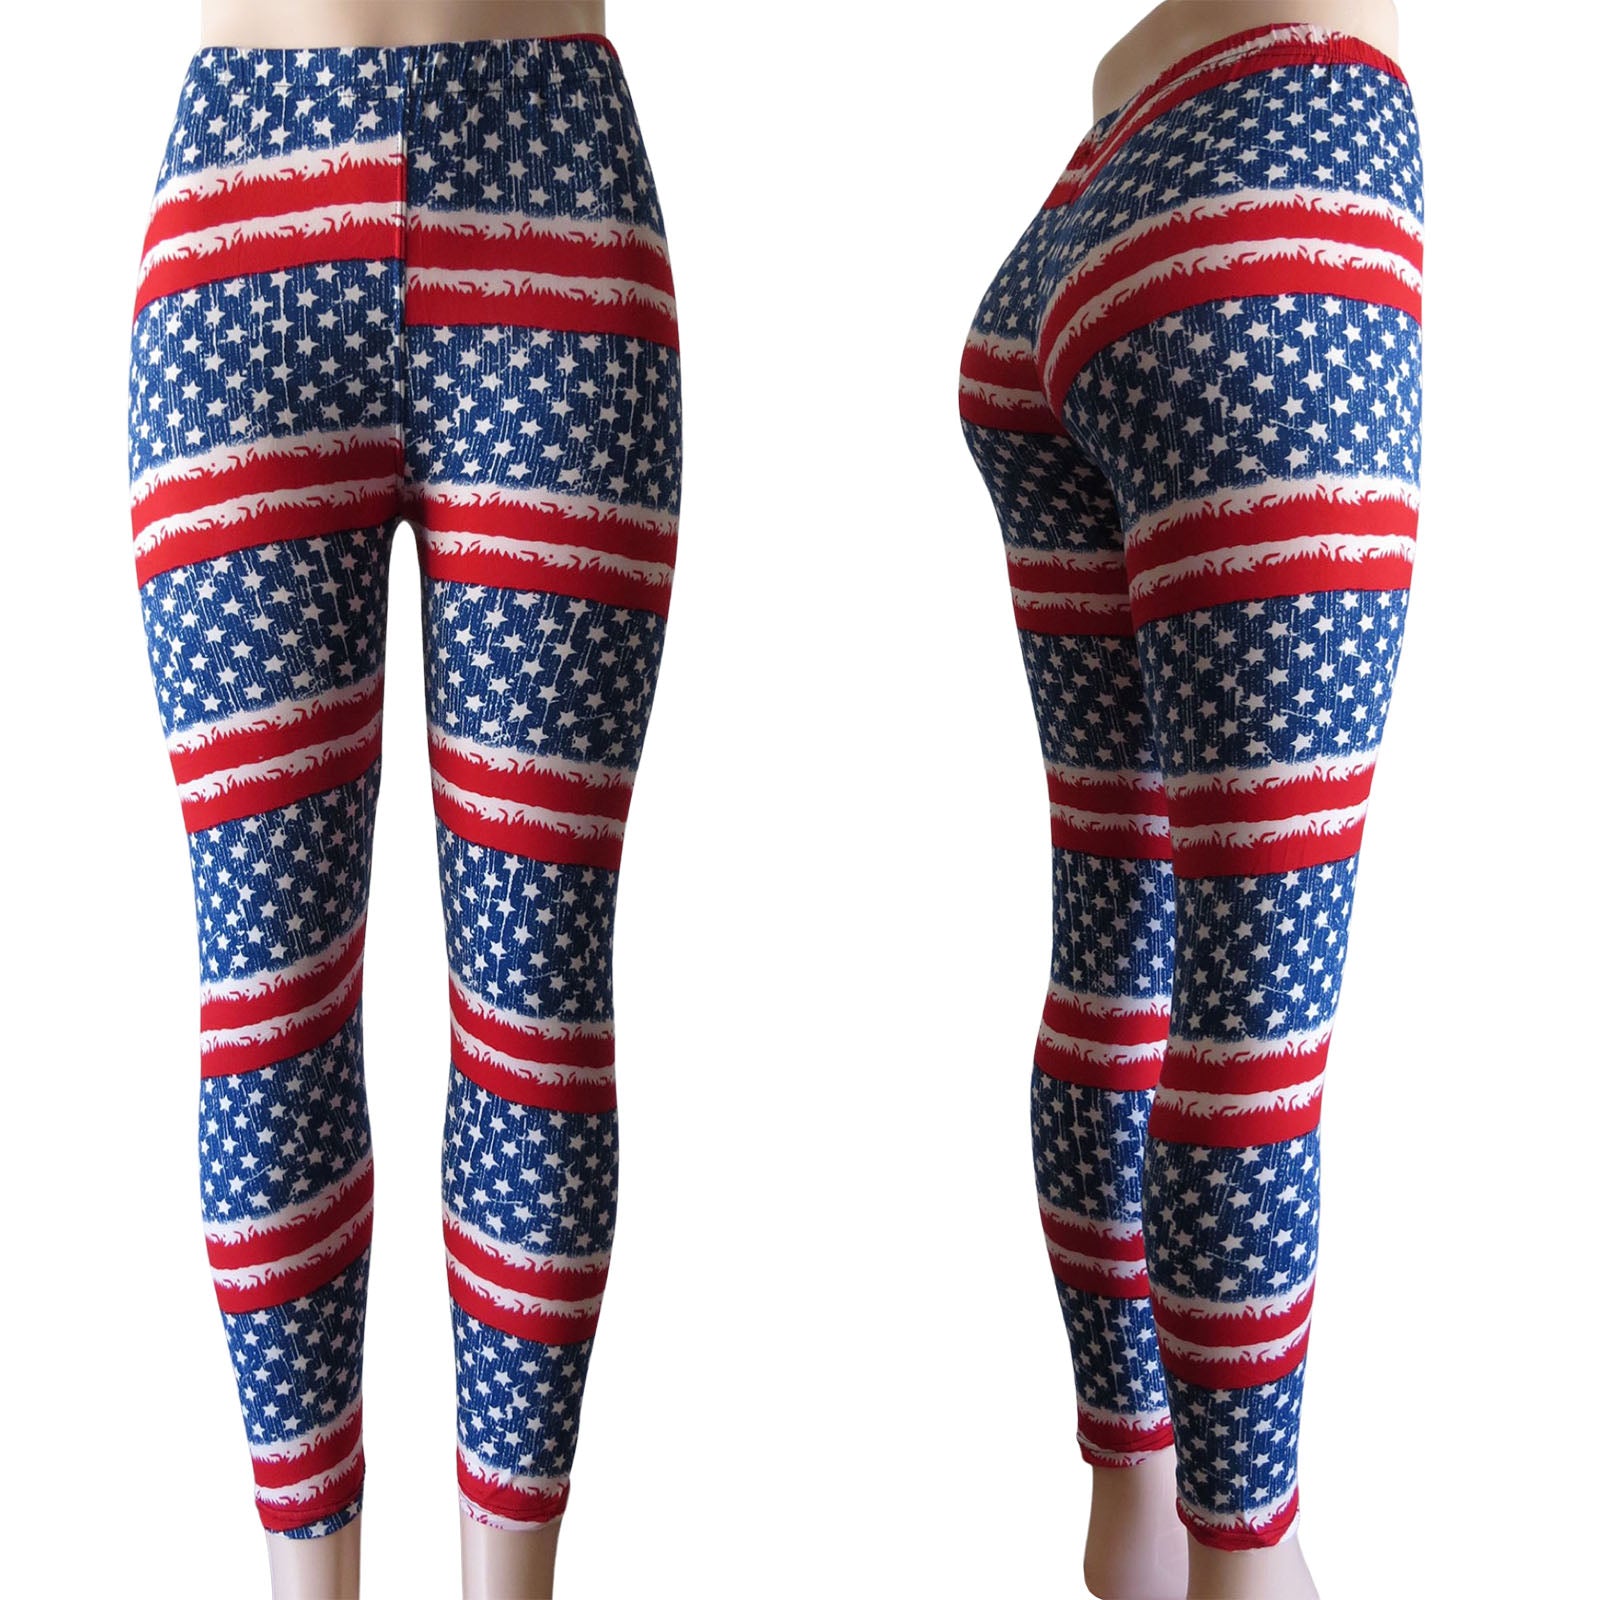 Wholesale USA American Flag Leggings Patriotic Red White and Blue